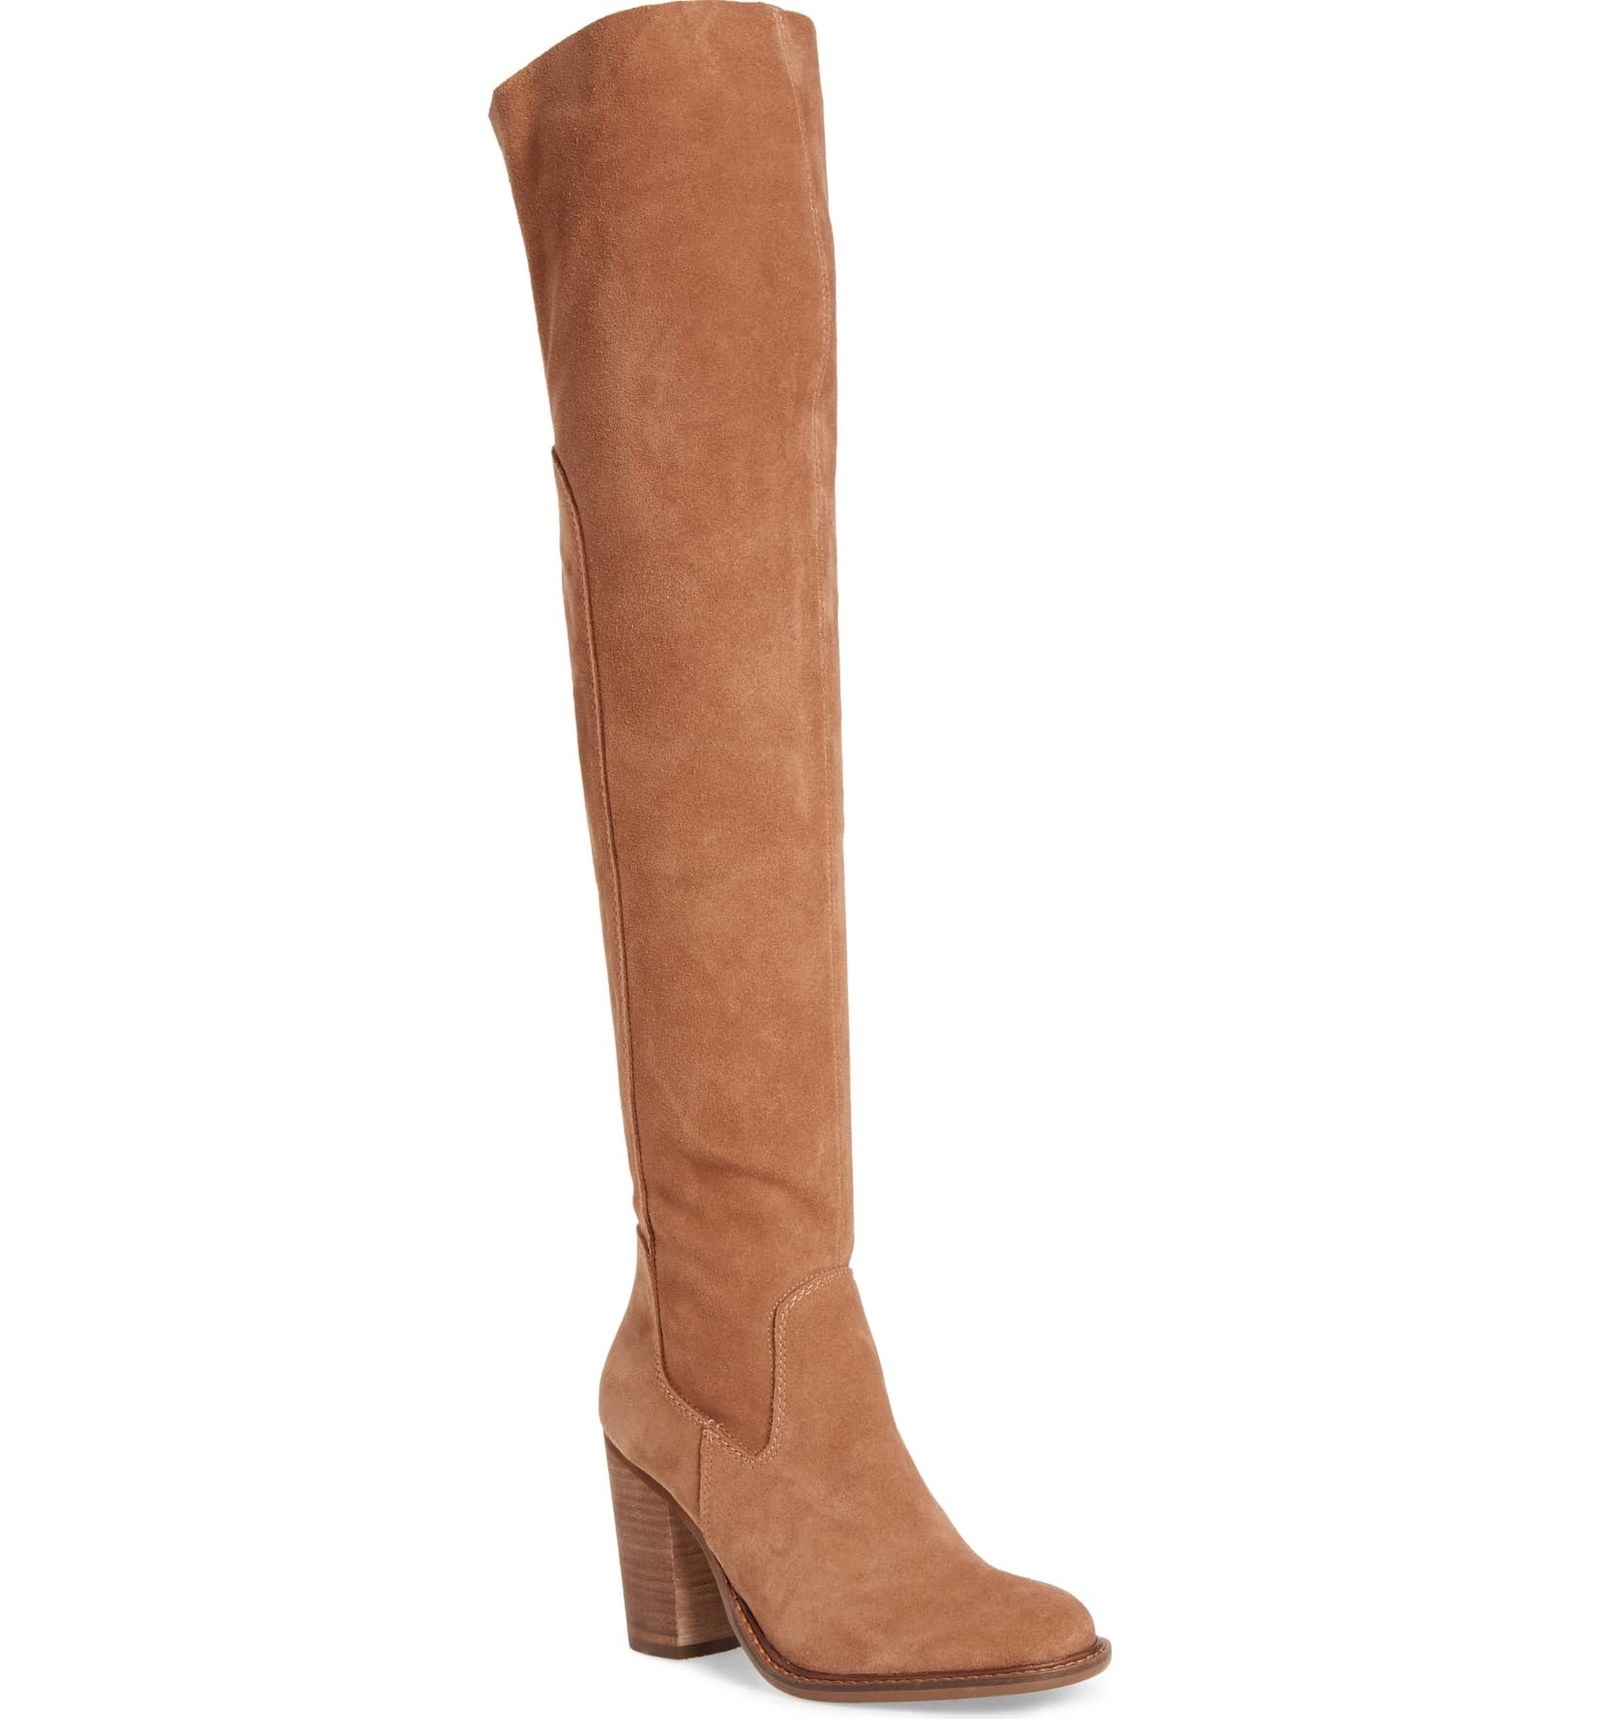 Tan suede boot